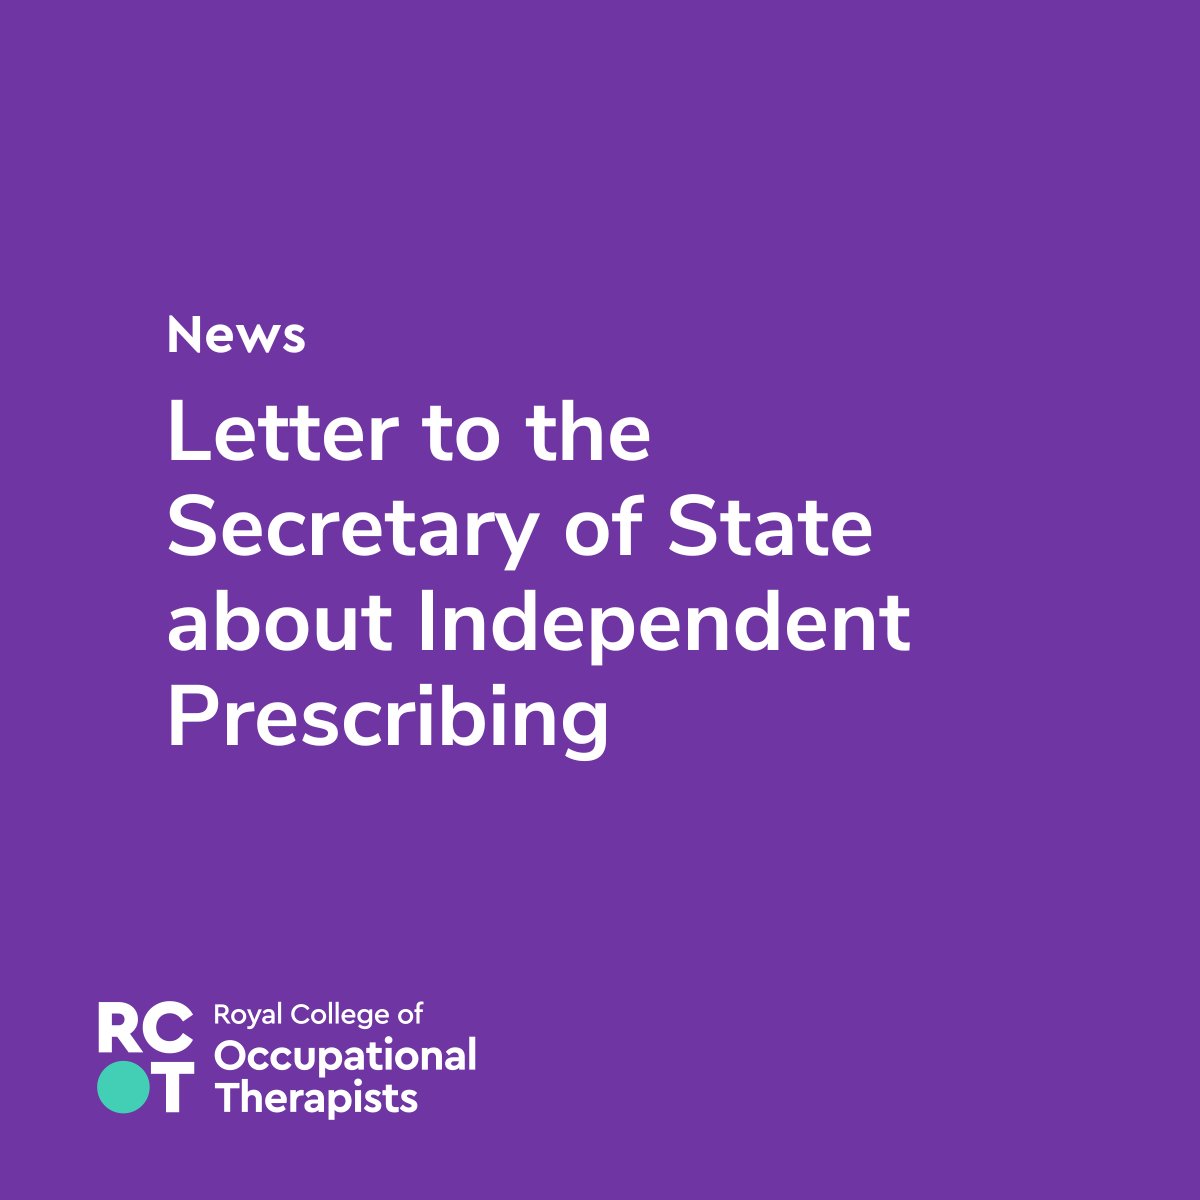 We've written to Victoria Atkins MP, Secretary of State for Health and Social Care, to reiterate why it's so important to extend independent prescribing responsibilities to occupational therapists. Read the letter: loom.ly/hsYwbxA